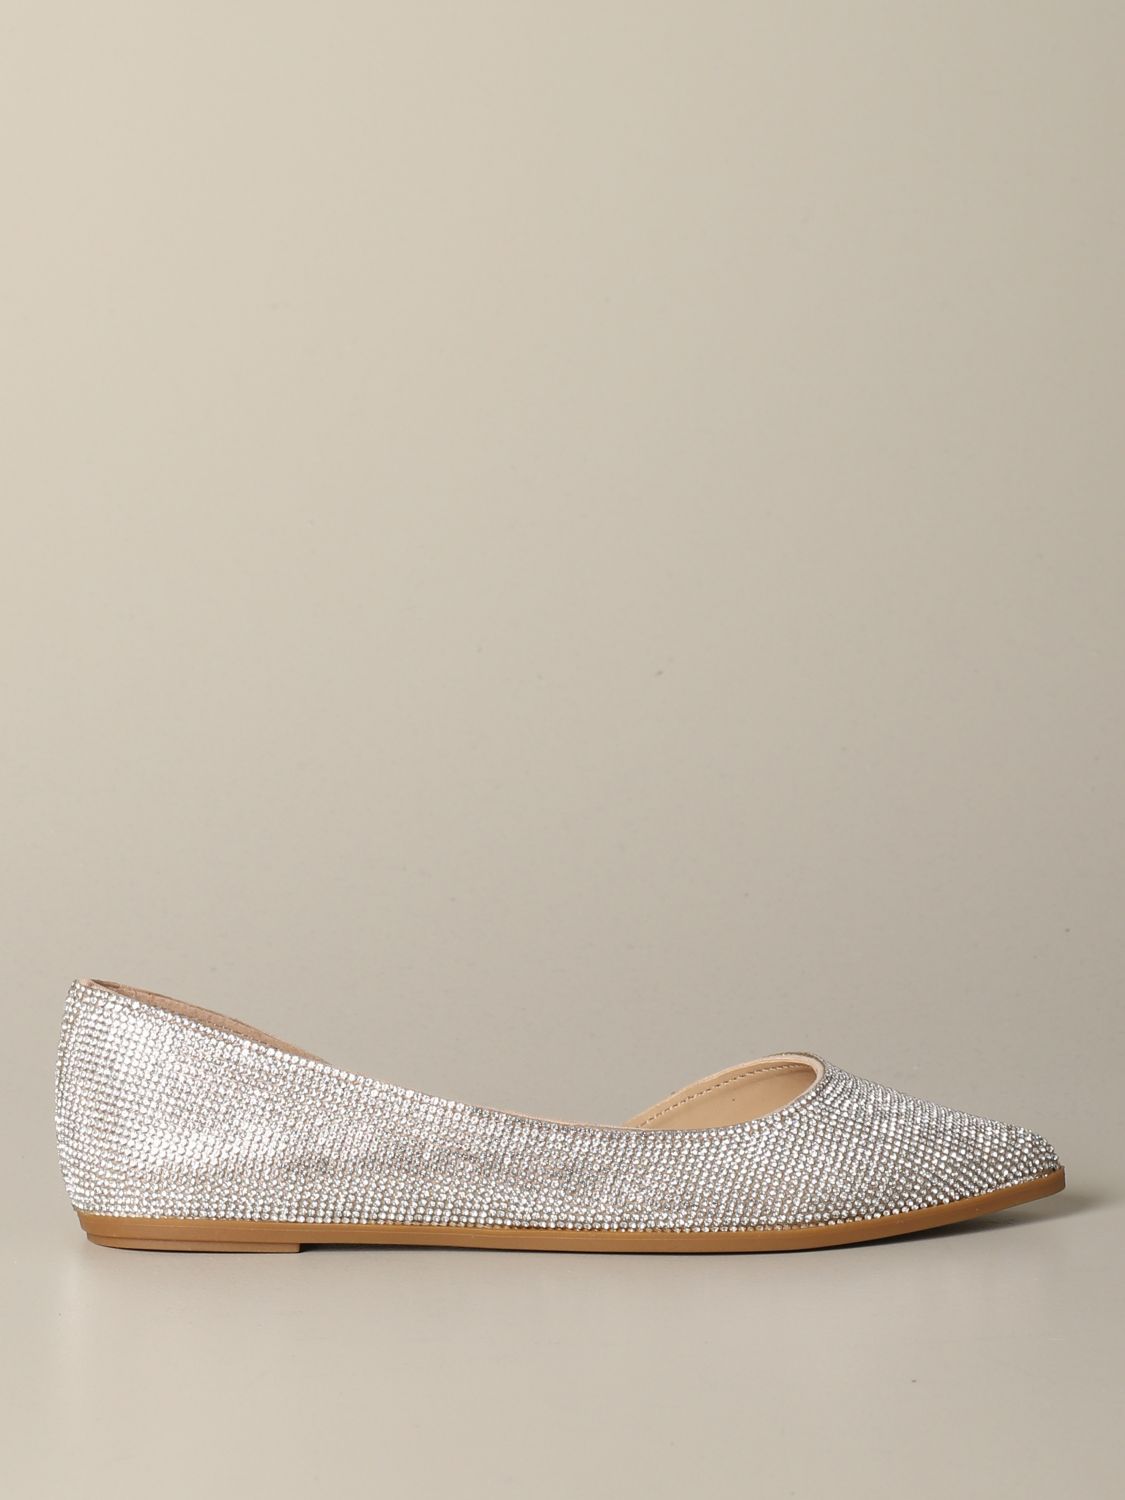 steve madden pointed flats